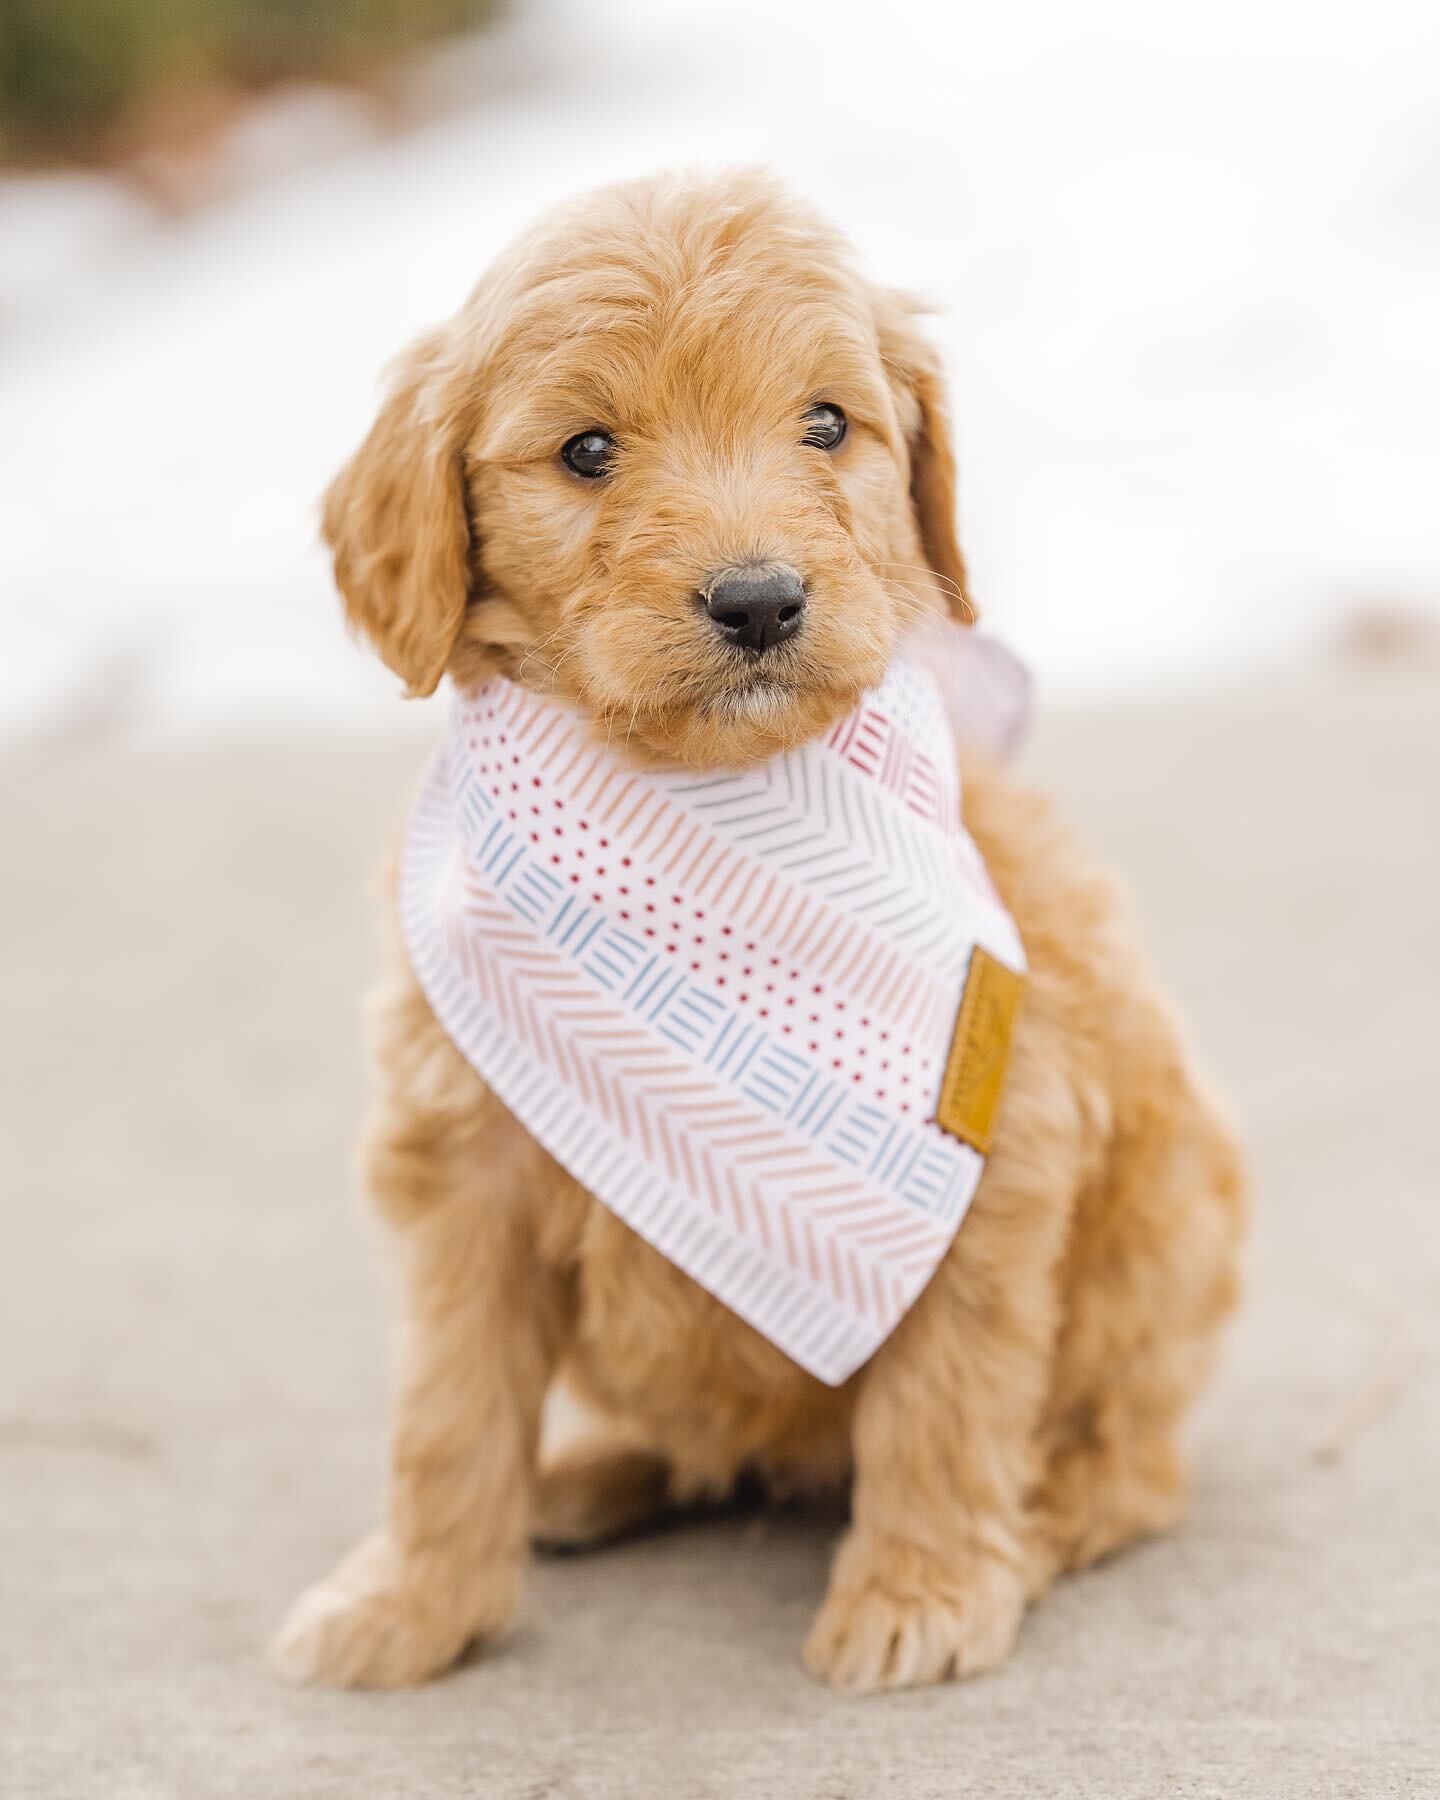 Santa 🎅🏼 | Standard Goldendoodle Male

Found an amazing home 🏡 

June + Jackie Chan had some amazing puppies, 10 puppies 👀 They are 6 weeks old and getting ready to head home soon. We can fly him to you using a flight nanny service if needed. 

S